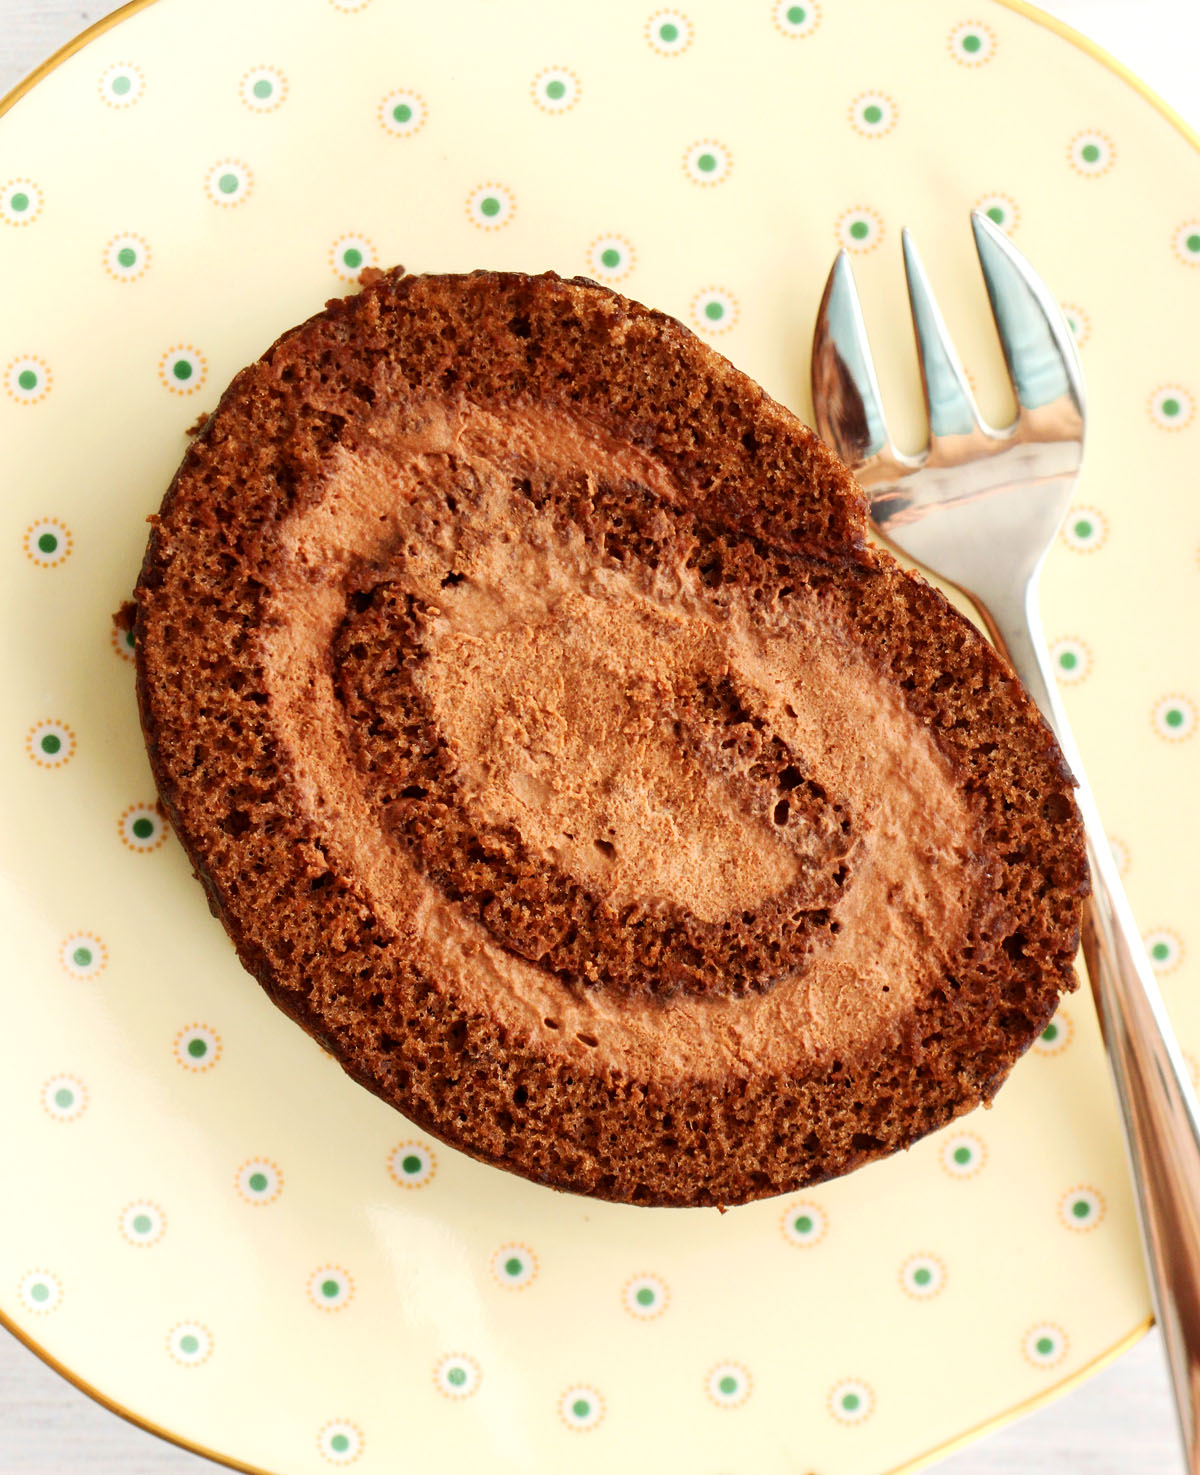 Chocolate Swiss Roll Recipe  The Flavor Bender